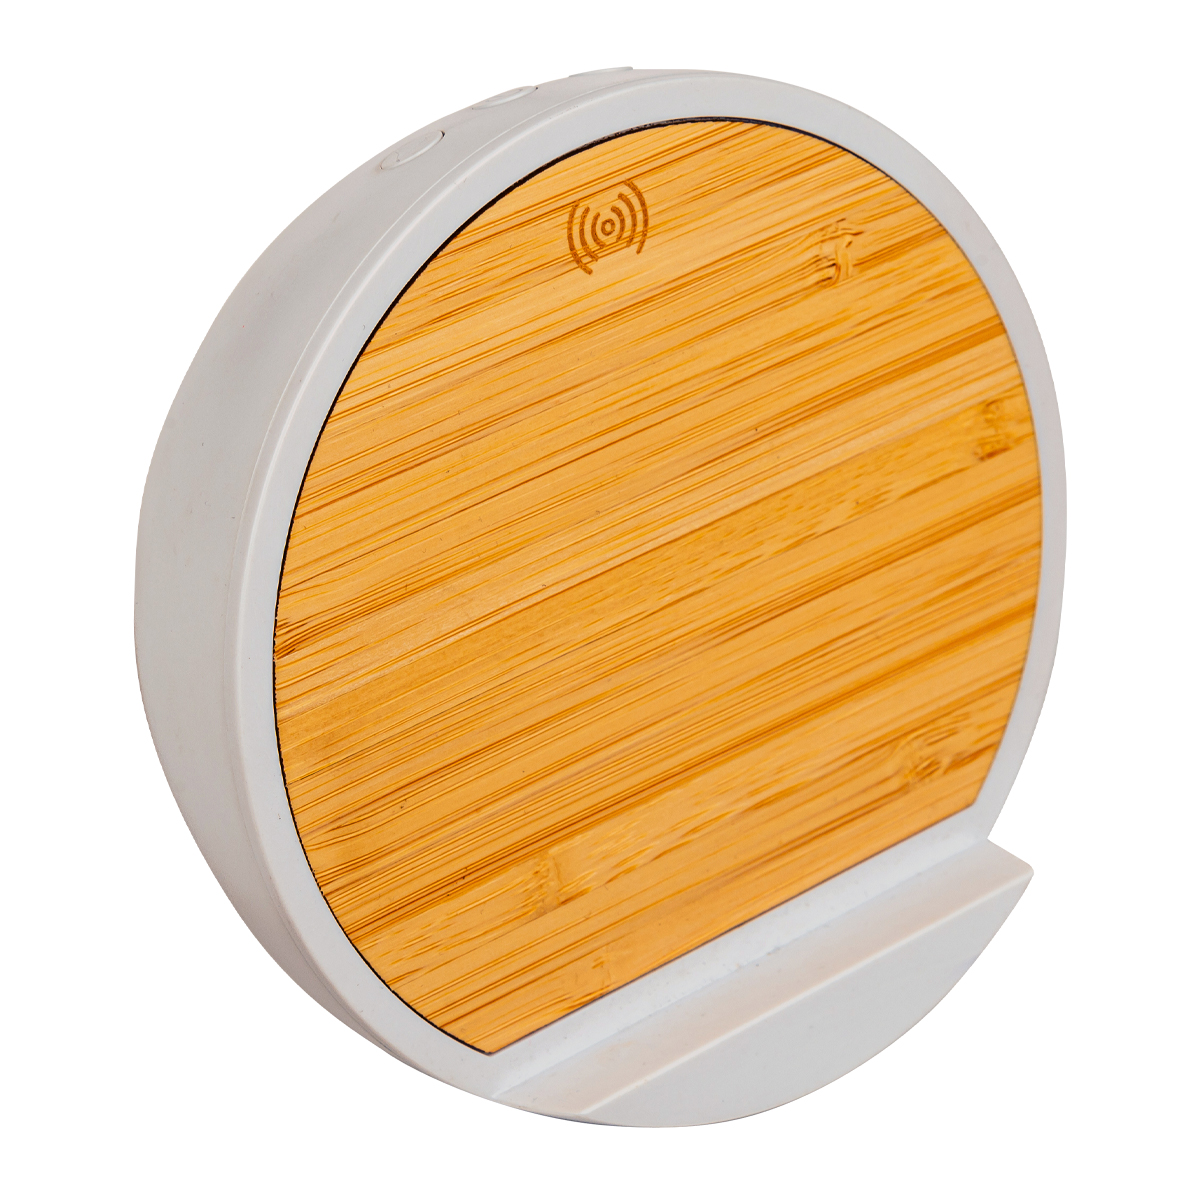 Hurley Bamboo Speaker Product Image